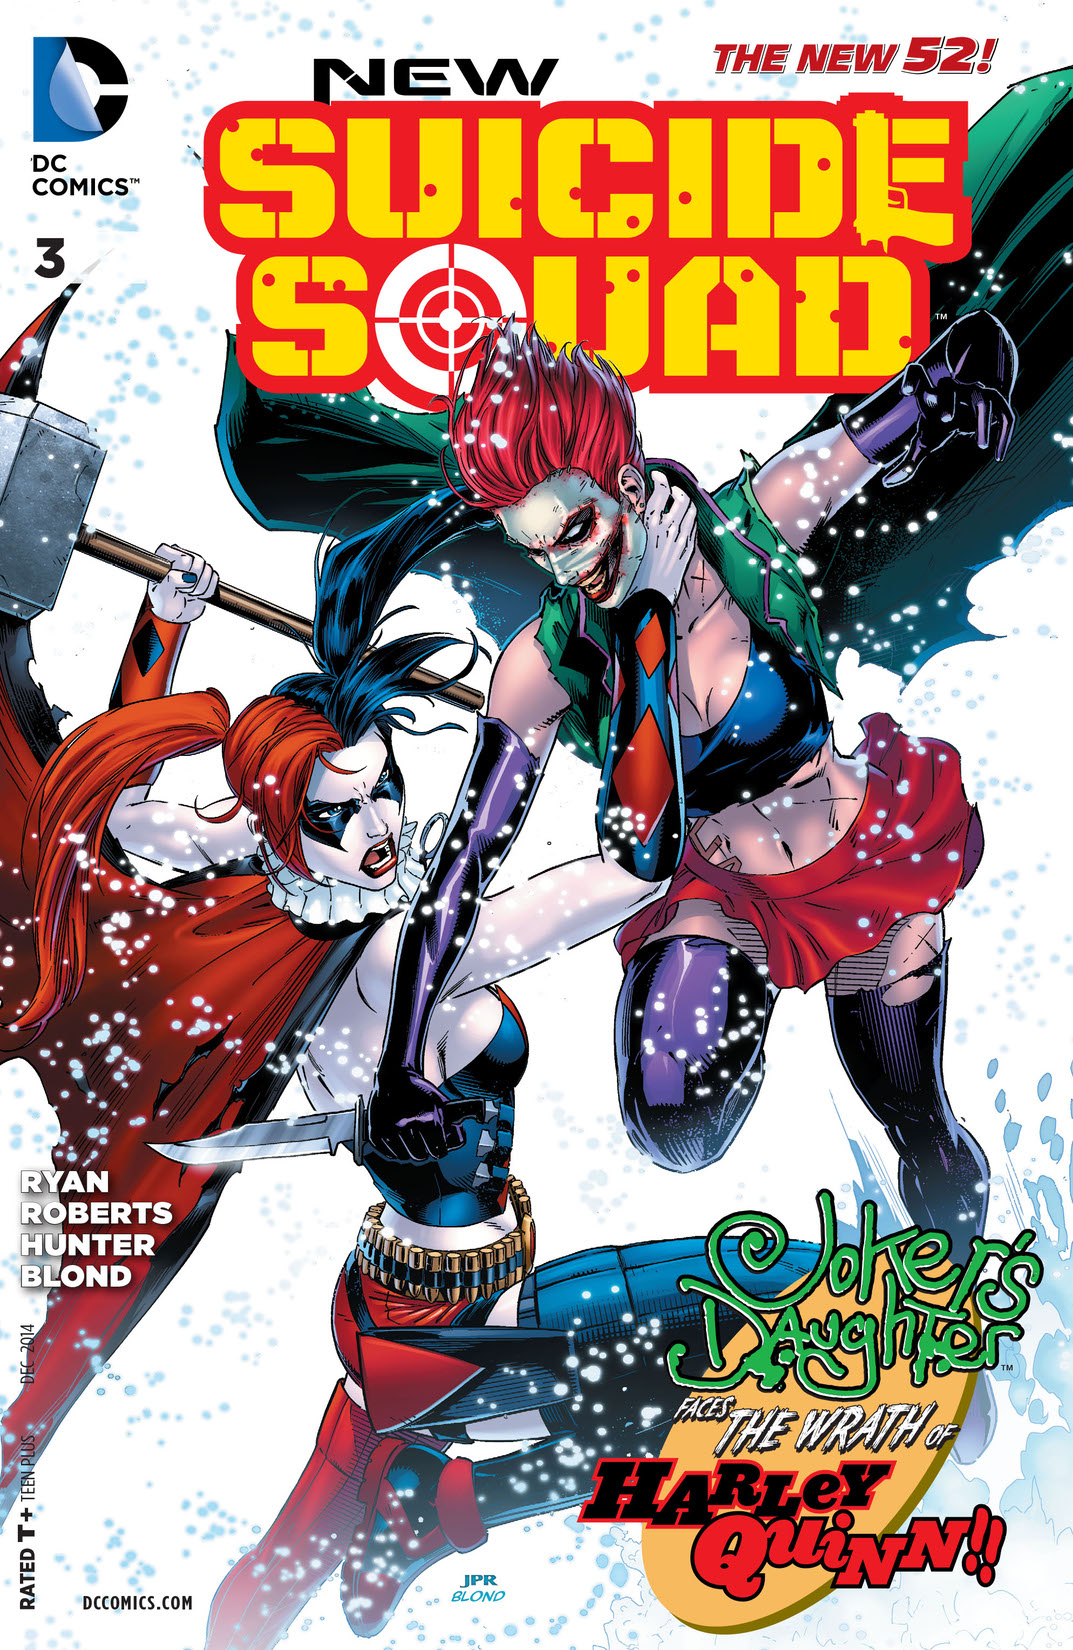 New Suicide Squad #3 preview images